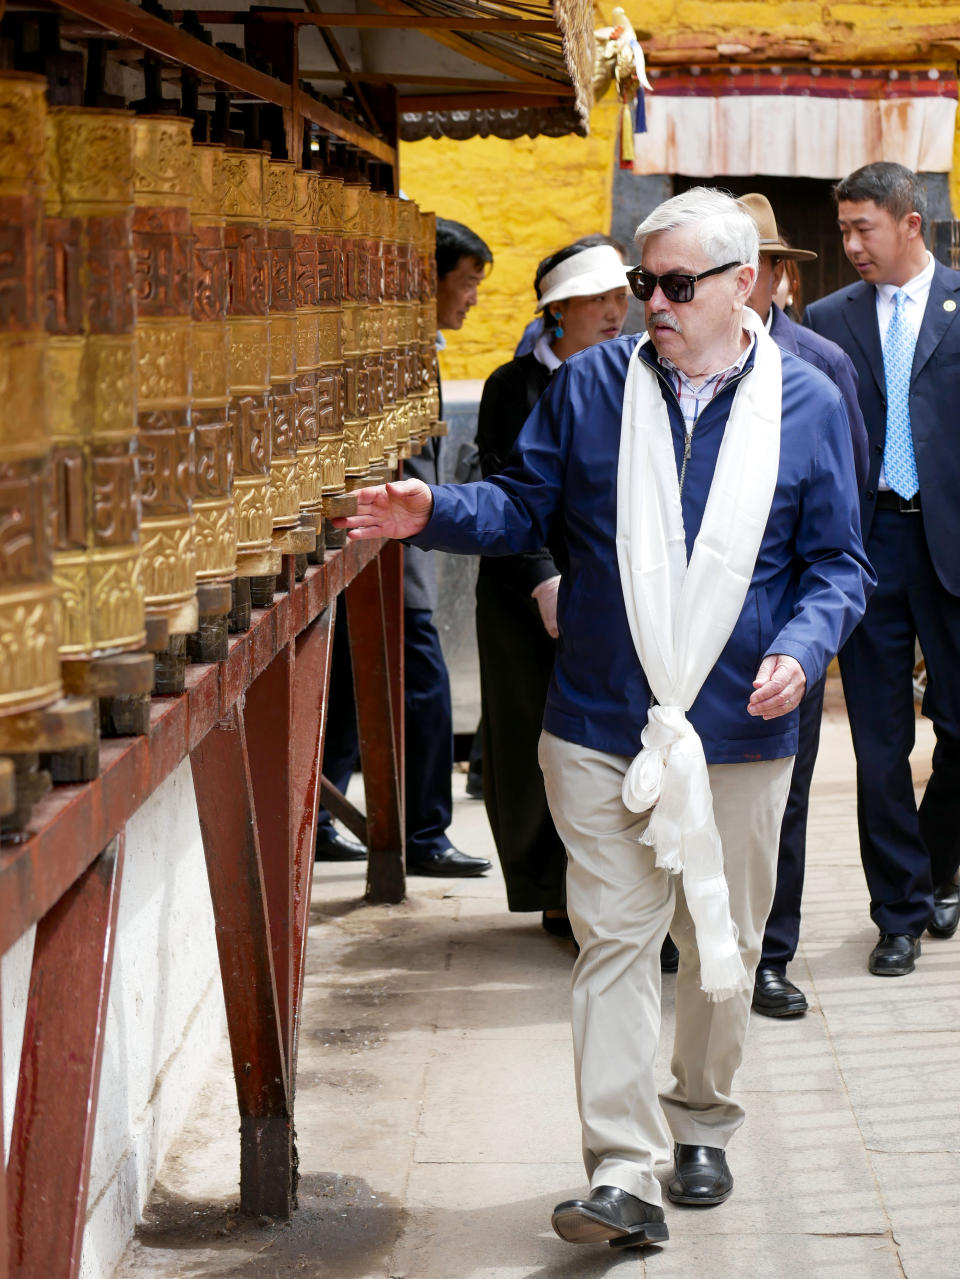 In this photo taken May 23, 2019, and released by the U.S. Embassy in Beijing, U.S. Ambassador to China Terry Branstad rotates prayer wheels in Lhasa in western China's Tibet Autonomous Region. The U.S. ambassador to China urged Beijing to engage in substantive dialogue with exiled Tibetan Buddhist leader the Dalai Lama during a visit to the Himalayan region over the past week, the Embassy said Saturday. (U.S. Mission to China via AP)